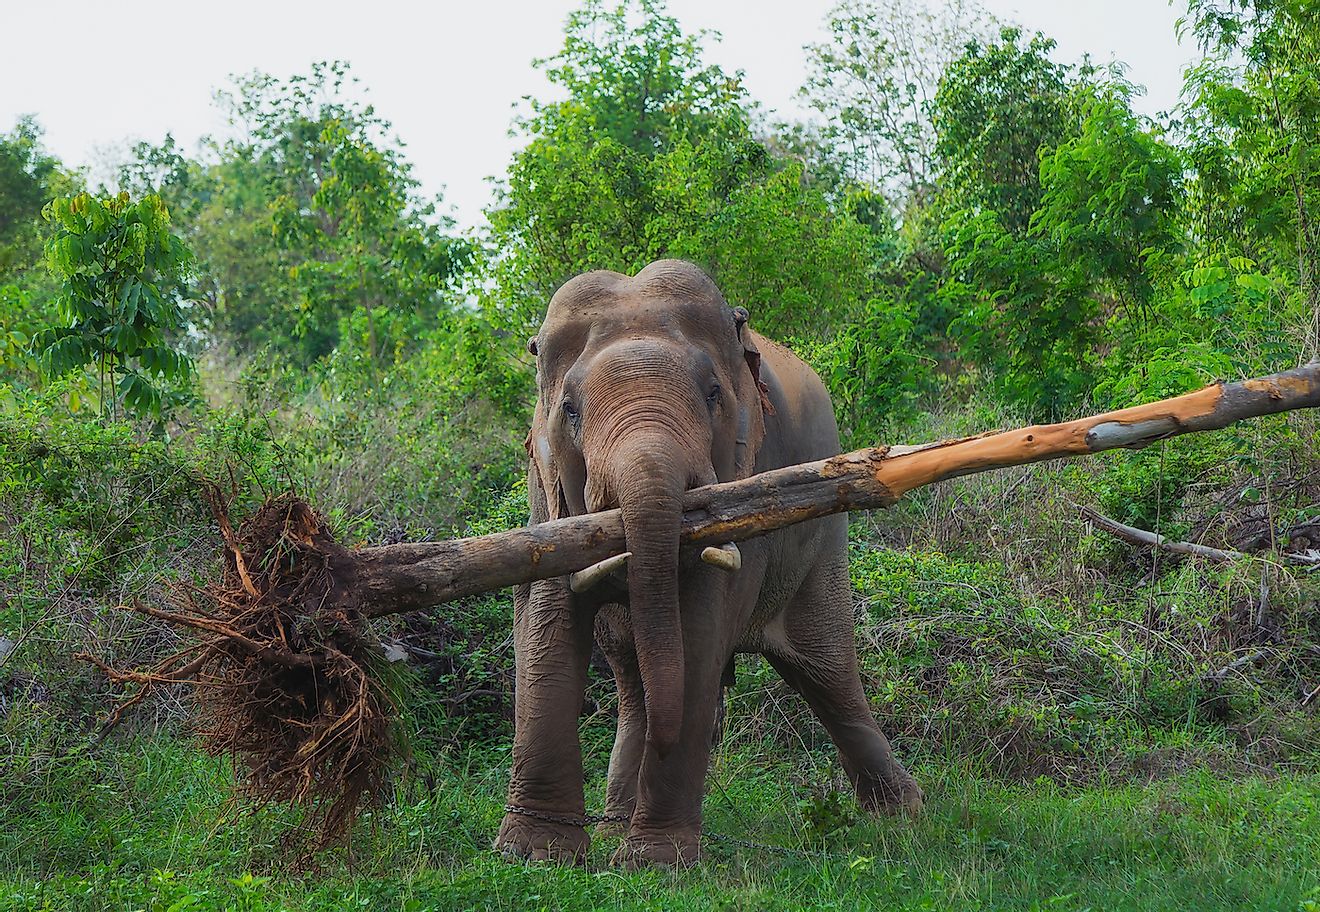 An African elephant with an uprooted tree. Image credit: MossStudio/Shutterstock.com